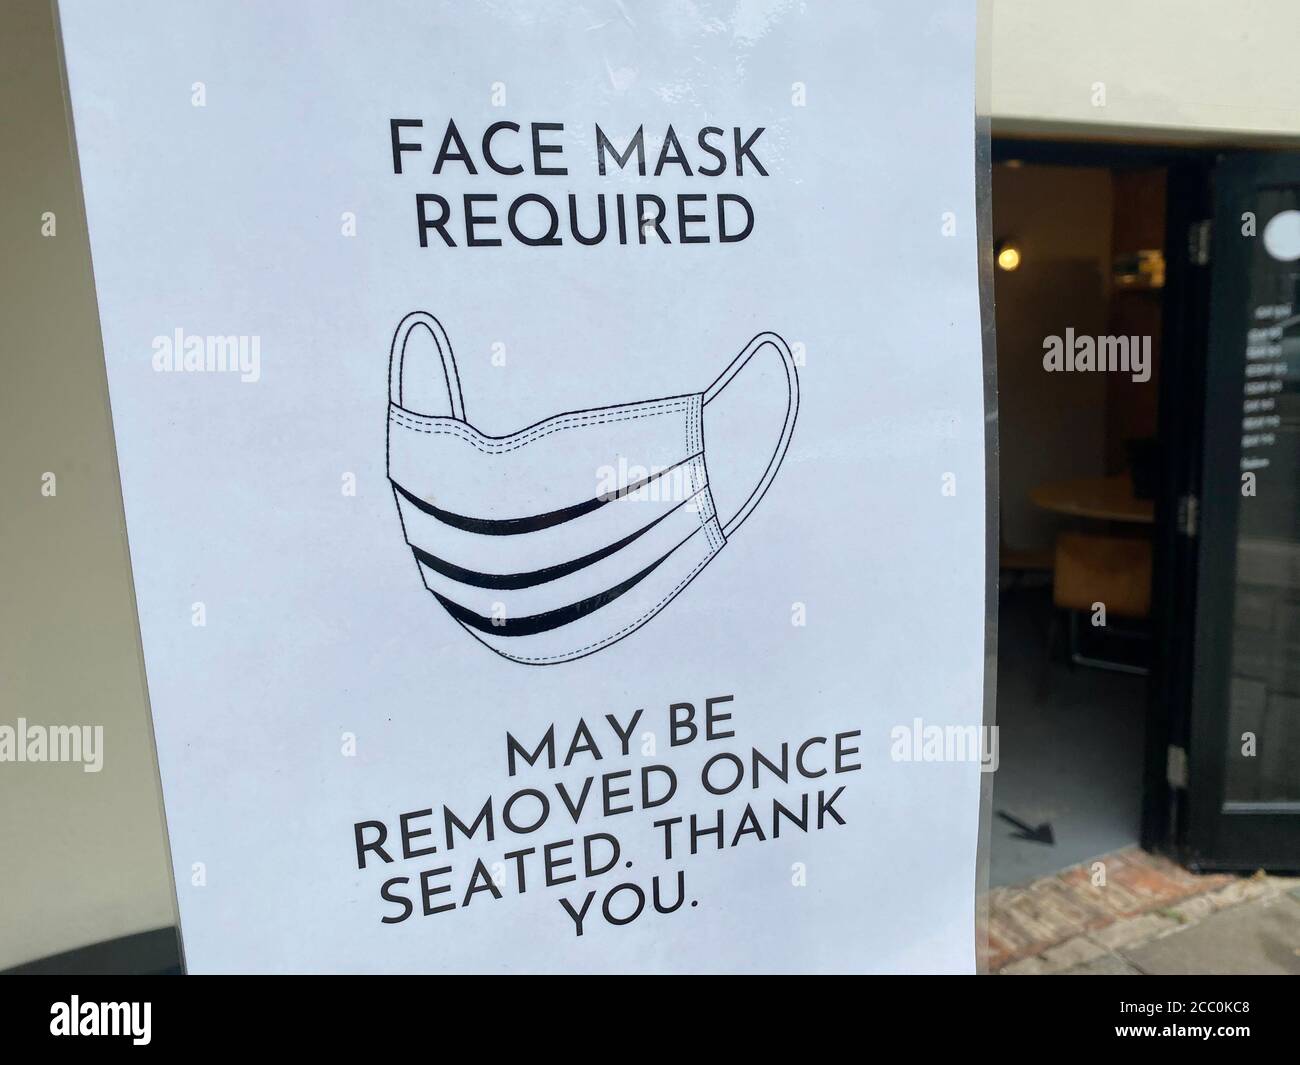 Protective face mask required sign outside a restaurant Stock Photo